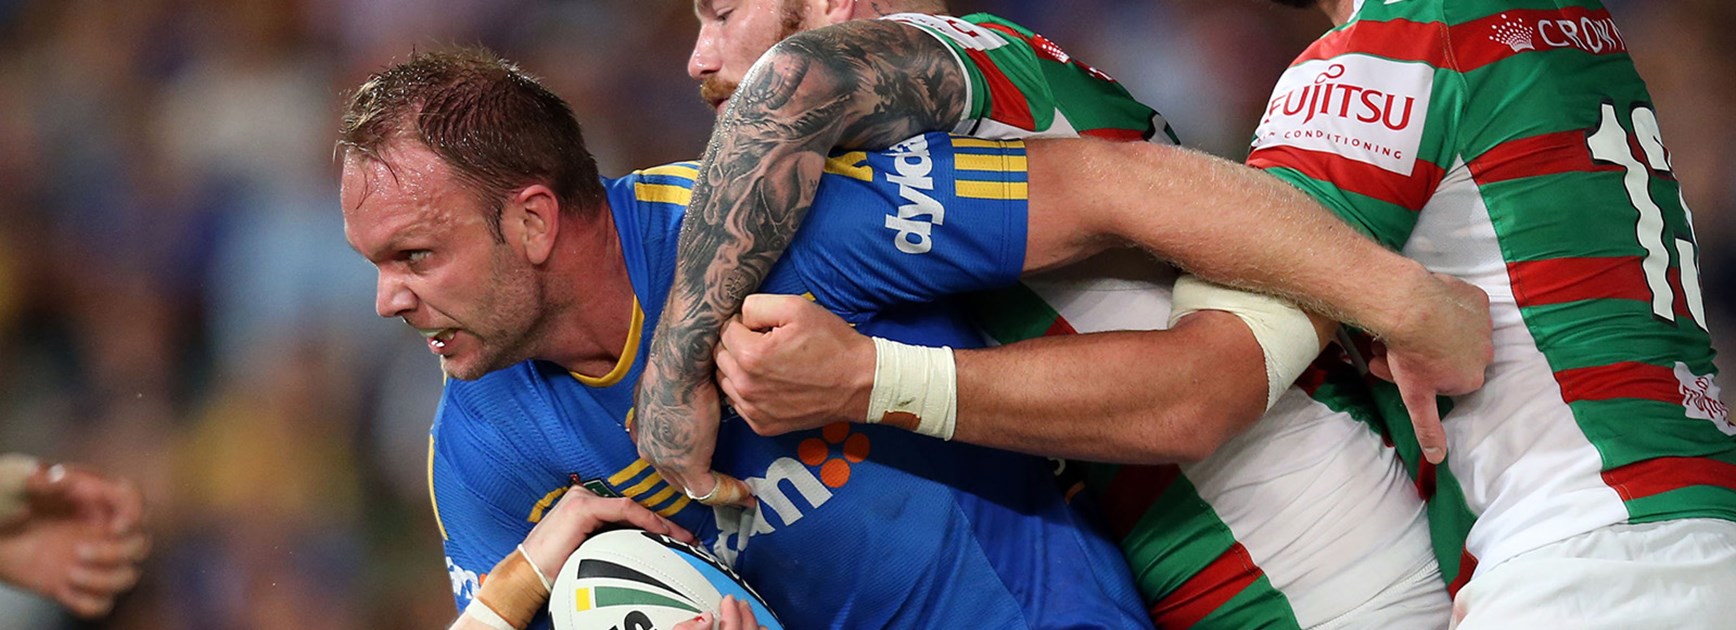 Eels forward David Gower takes a hit-up against the Rabbitohs in Round 4.